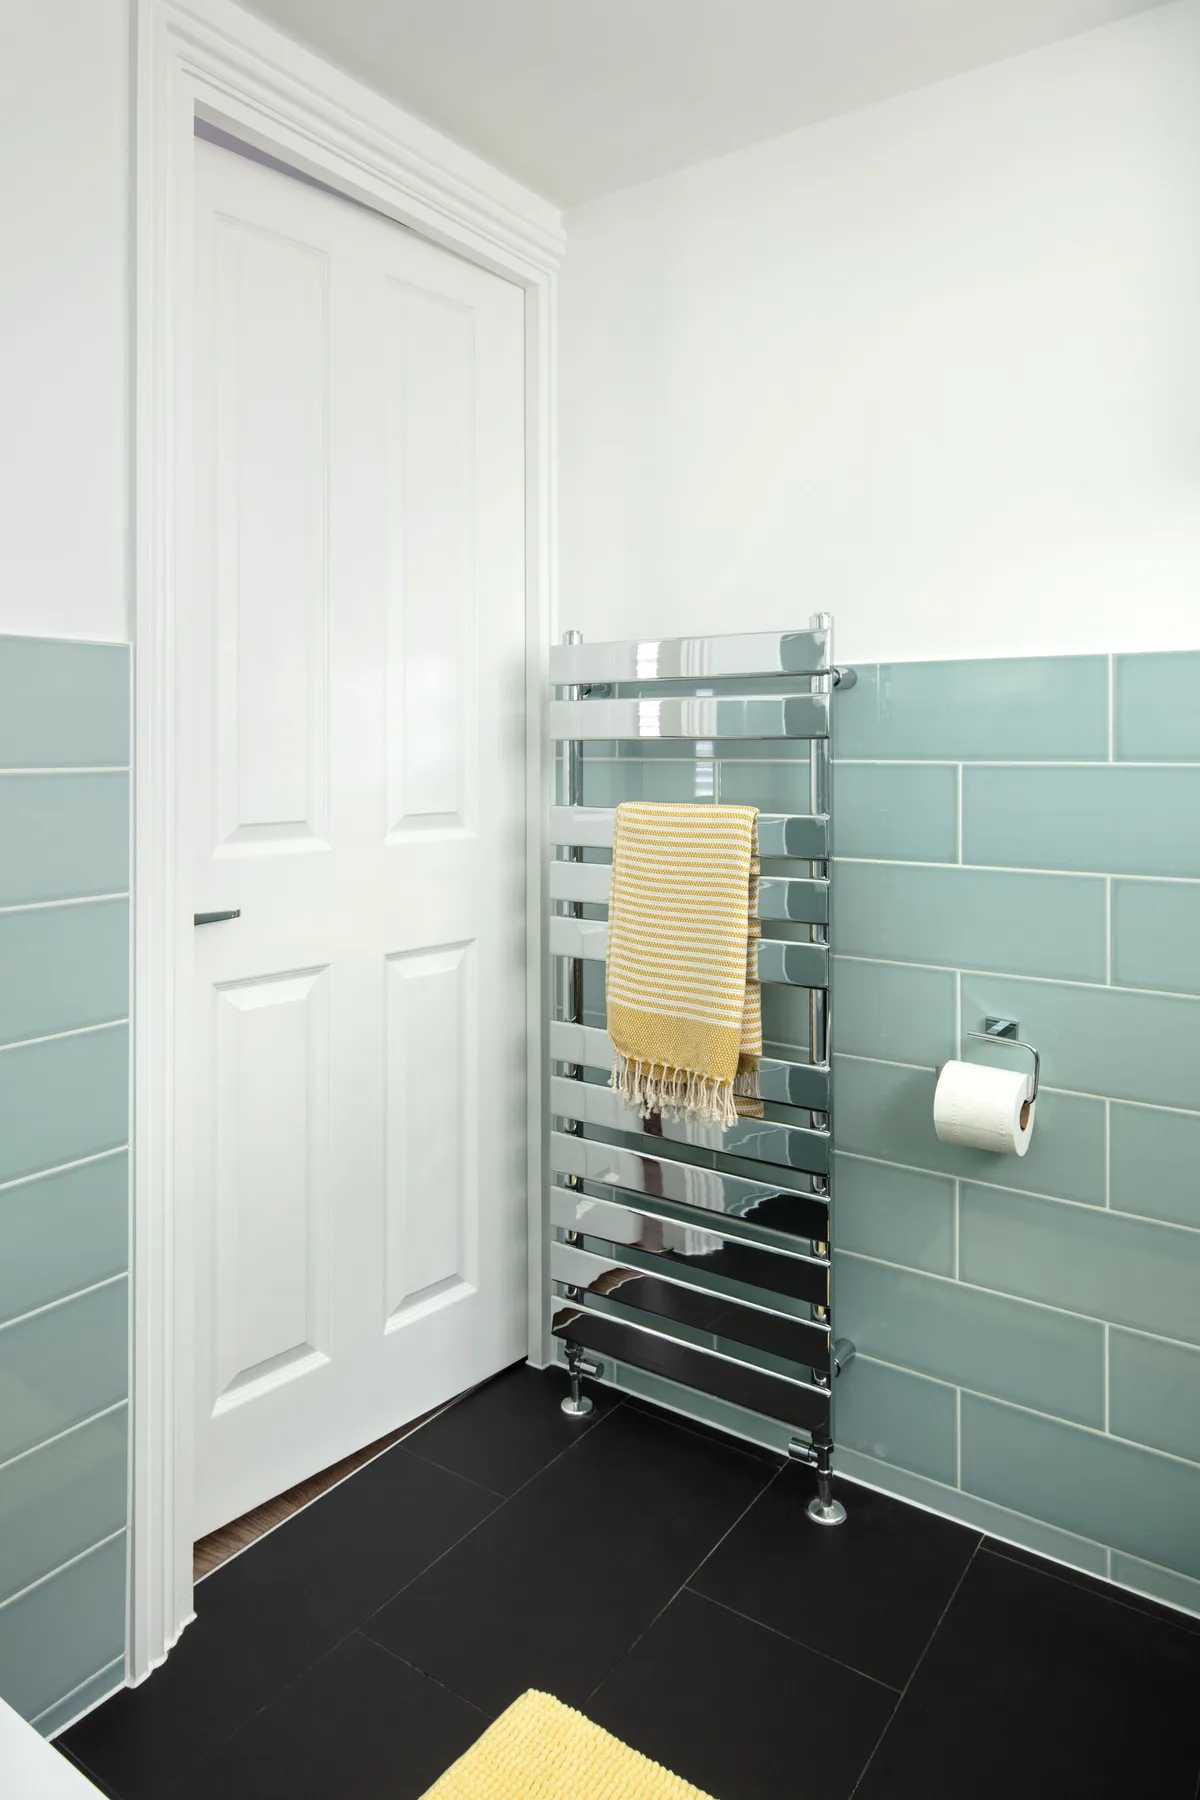 The empty area by the door was the right spot for a heated rail – it blasts out plenty of warmth and keeps the towels toasty